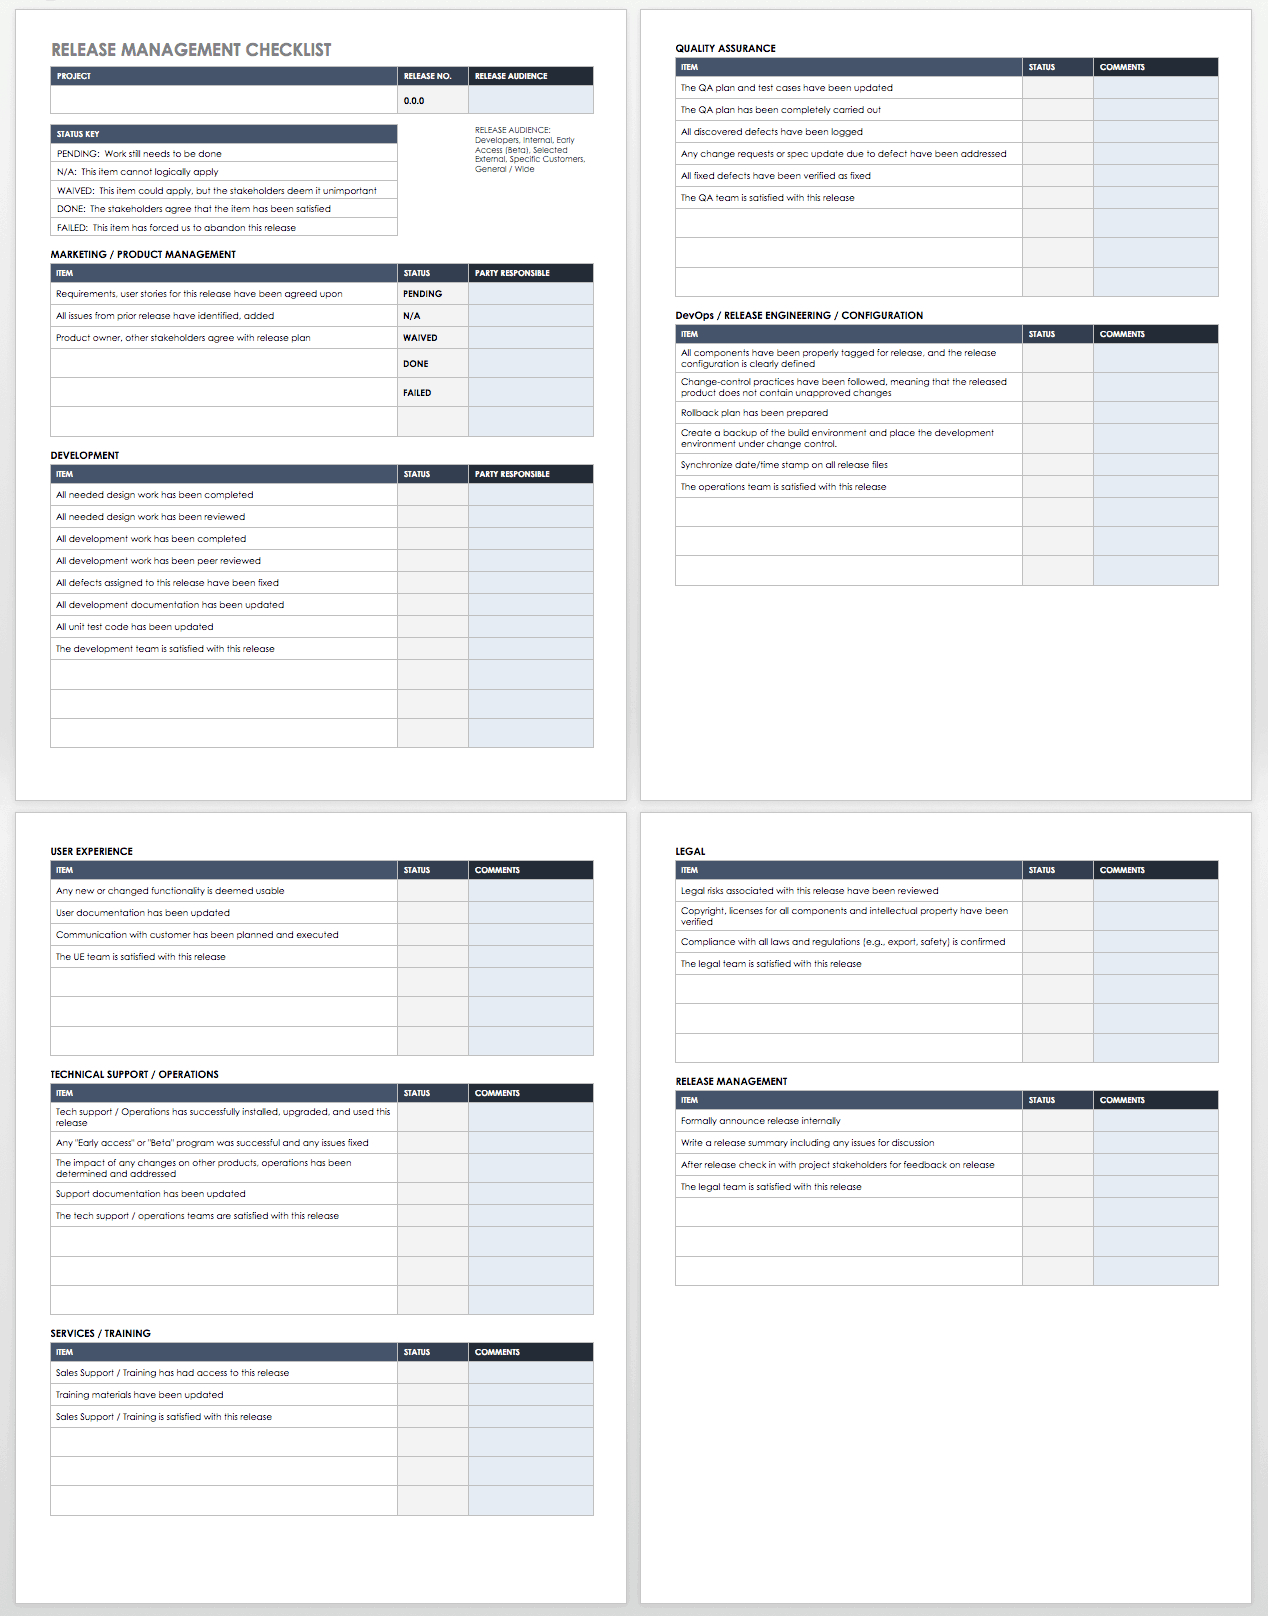 Free Itil Templates | Smartsheet With Regard To Service Review Report Template